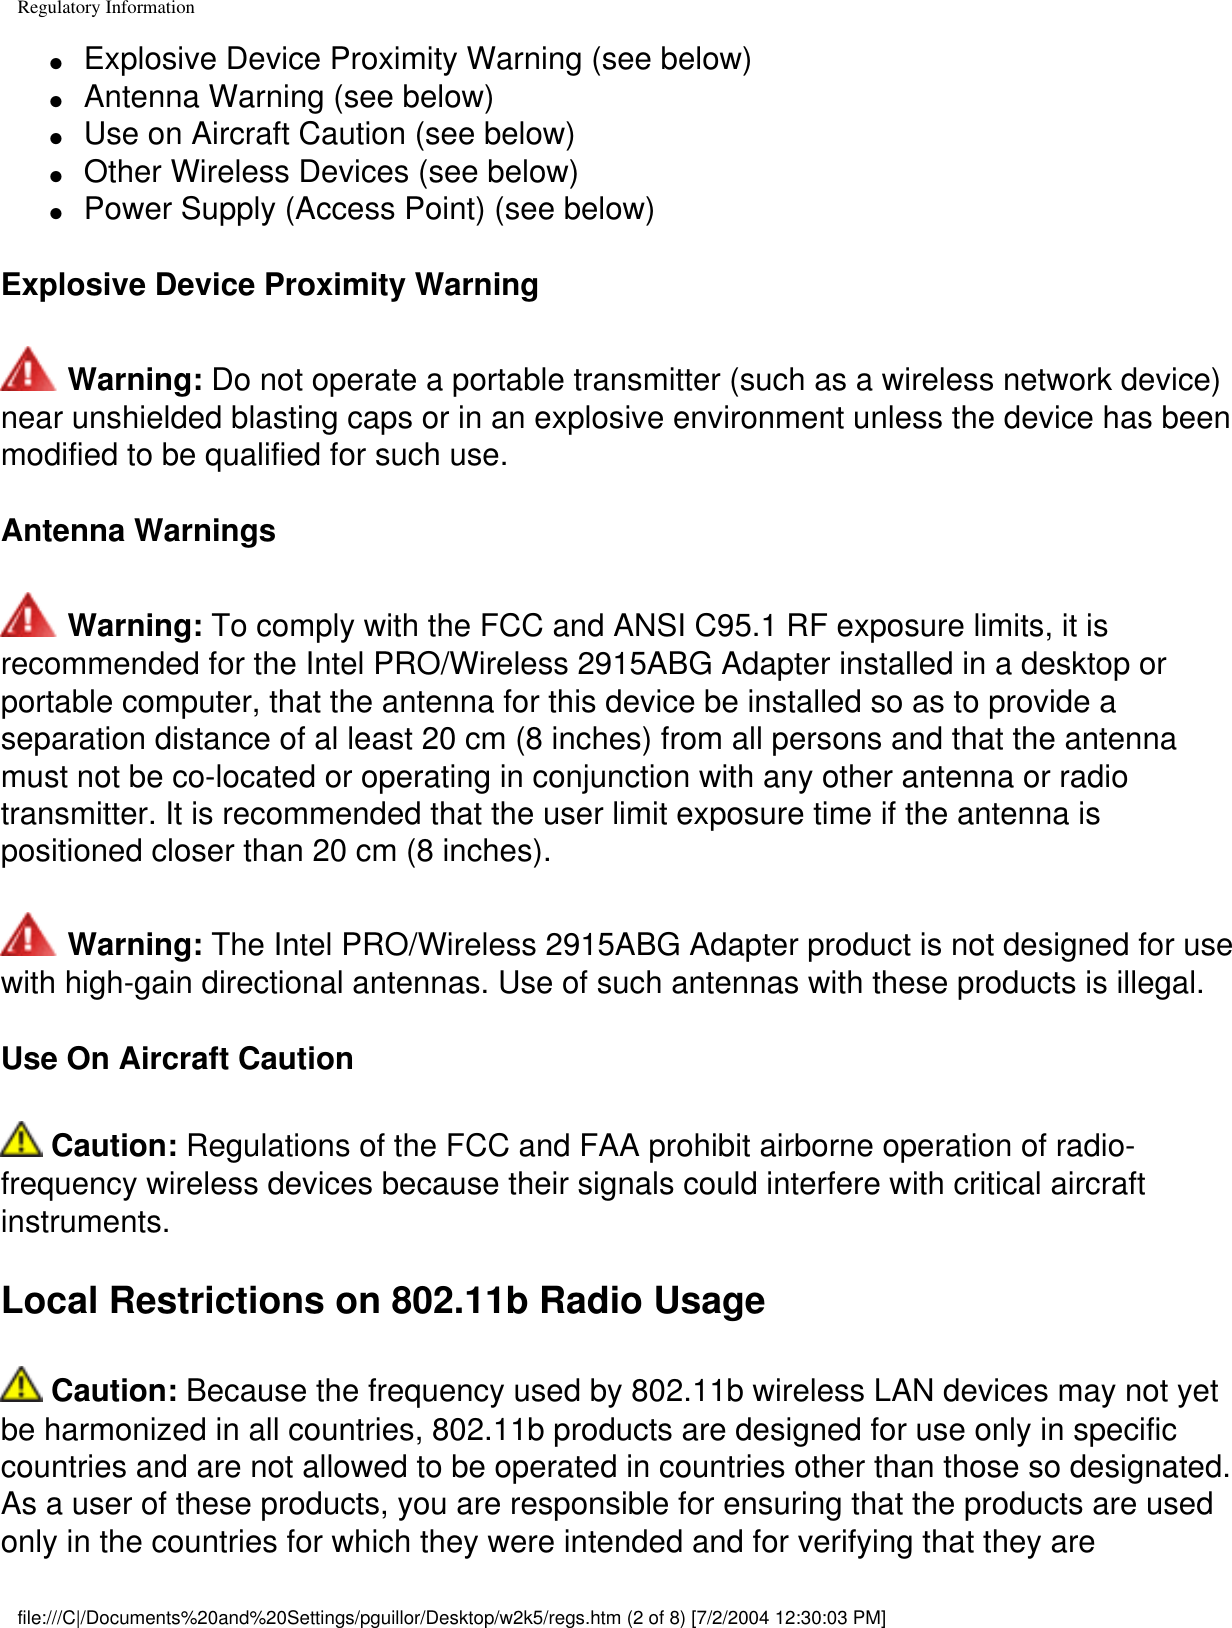 Regulatory Information●     Explosive Device Proximity Warning (see below)●     Antenna Warning (see below)●     Use on Aircraft Caution (see below)●     Other Wireless Devices (see below)●     Power Supply (Access Point) (see below)Explosive Device Proximity Warning Warning: Do not operate a portable transmitter (such as a wireless network device) near unshielded blasting caps or in an explosive environment unless the device has been modified to be qualified for such use.Antenna Warnings Warning: To comply with the FCC and ANSI C95.1 RF exposure limits, it is recommended for the Intel PRO/Wireless 2915ABG Adapter installed in a desktop or portable computer, that the antenna for this device be installed so as to provide a separation distance of al least 20 cm (8 inches) from all persons and that the antenna must not be co-located or operating in conjunction with any other antenna or radio transmitter. It is recommended that the user limit exposure time if the antenna is positioned closer than 20 cm (8 inches). Warning: The Intel PRO/Wireless 2915ABG Adapter product is not designed for use with high-gain directional antennas. Use of such antennas with these products is illegal.Use On Aircraft Caution Caution: Regulations of the FCC and FAA prohibit airborne operation of radio-frequency wireless devices because their signals could interfere with critical aircraft instruments.Local Restrictions on 802.11b Radio Usage Caution: Because the frequency used by 802.11b wireless LAN devices may not yet be harmonized in all countries, 802.11b products are designed for use only in specific countries and are not allowed to be operated in countries other than those so designated. As a user of these products, you are responsible for ensuring that the products are used only in the countries for which they were intended and for verifying that they are file:///C|/Documents%20and%20Settings/pguillor/Desktop/w2k5/regs.htm (2 of 8) [7/2/2004 12:30:03 PM]